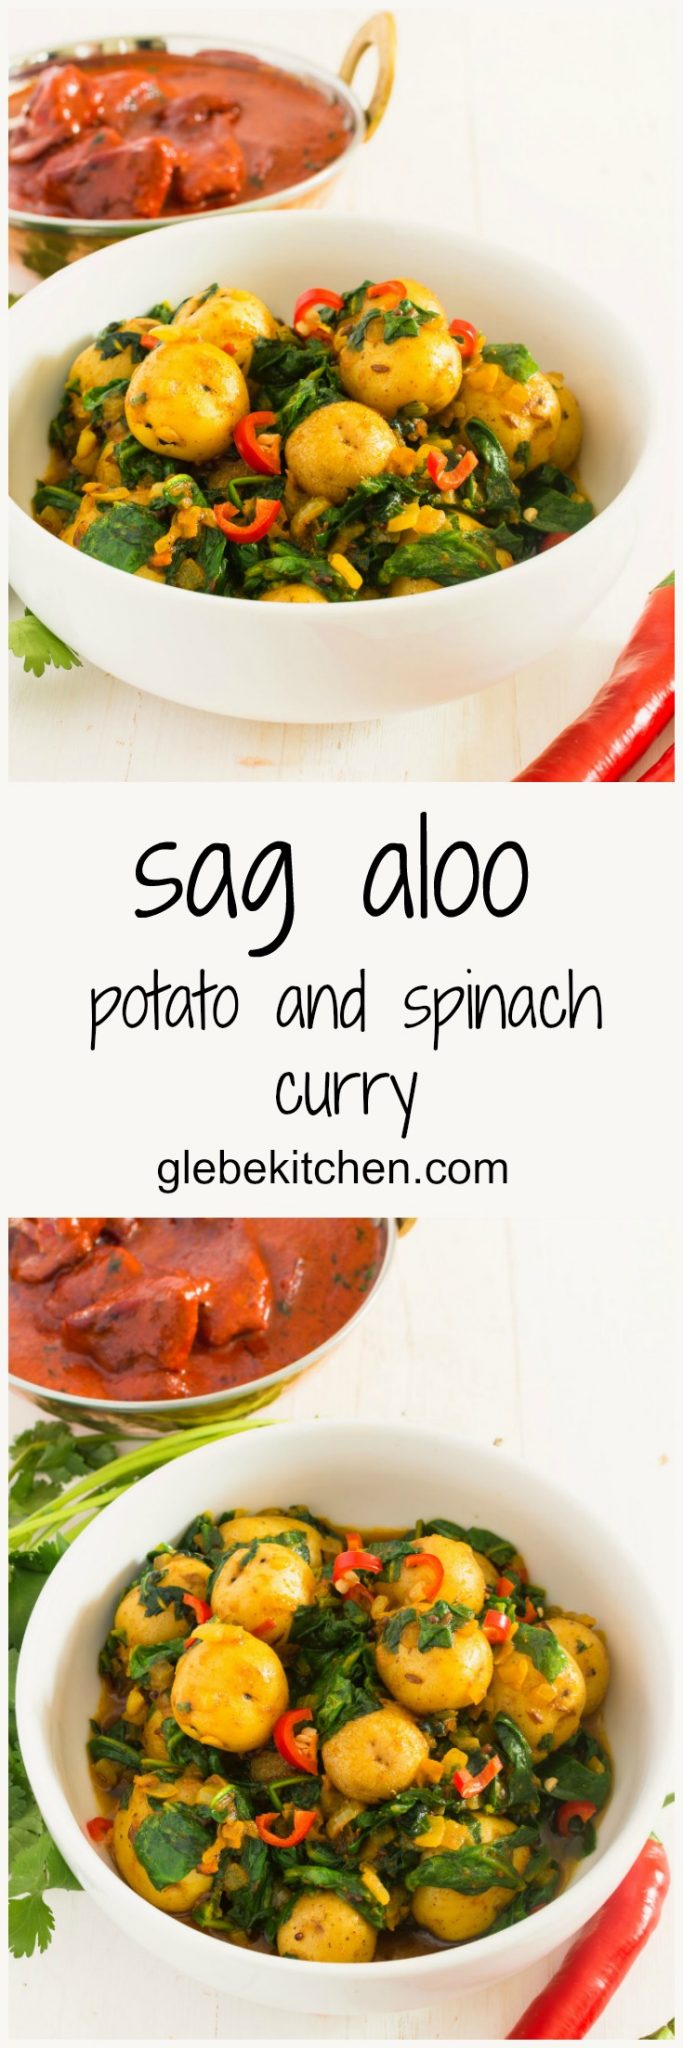 Sag aloo or spinach and potato curry is a delicious vegetarian meal.